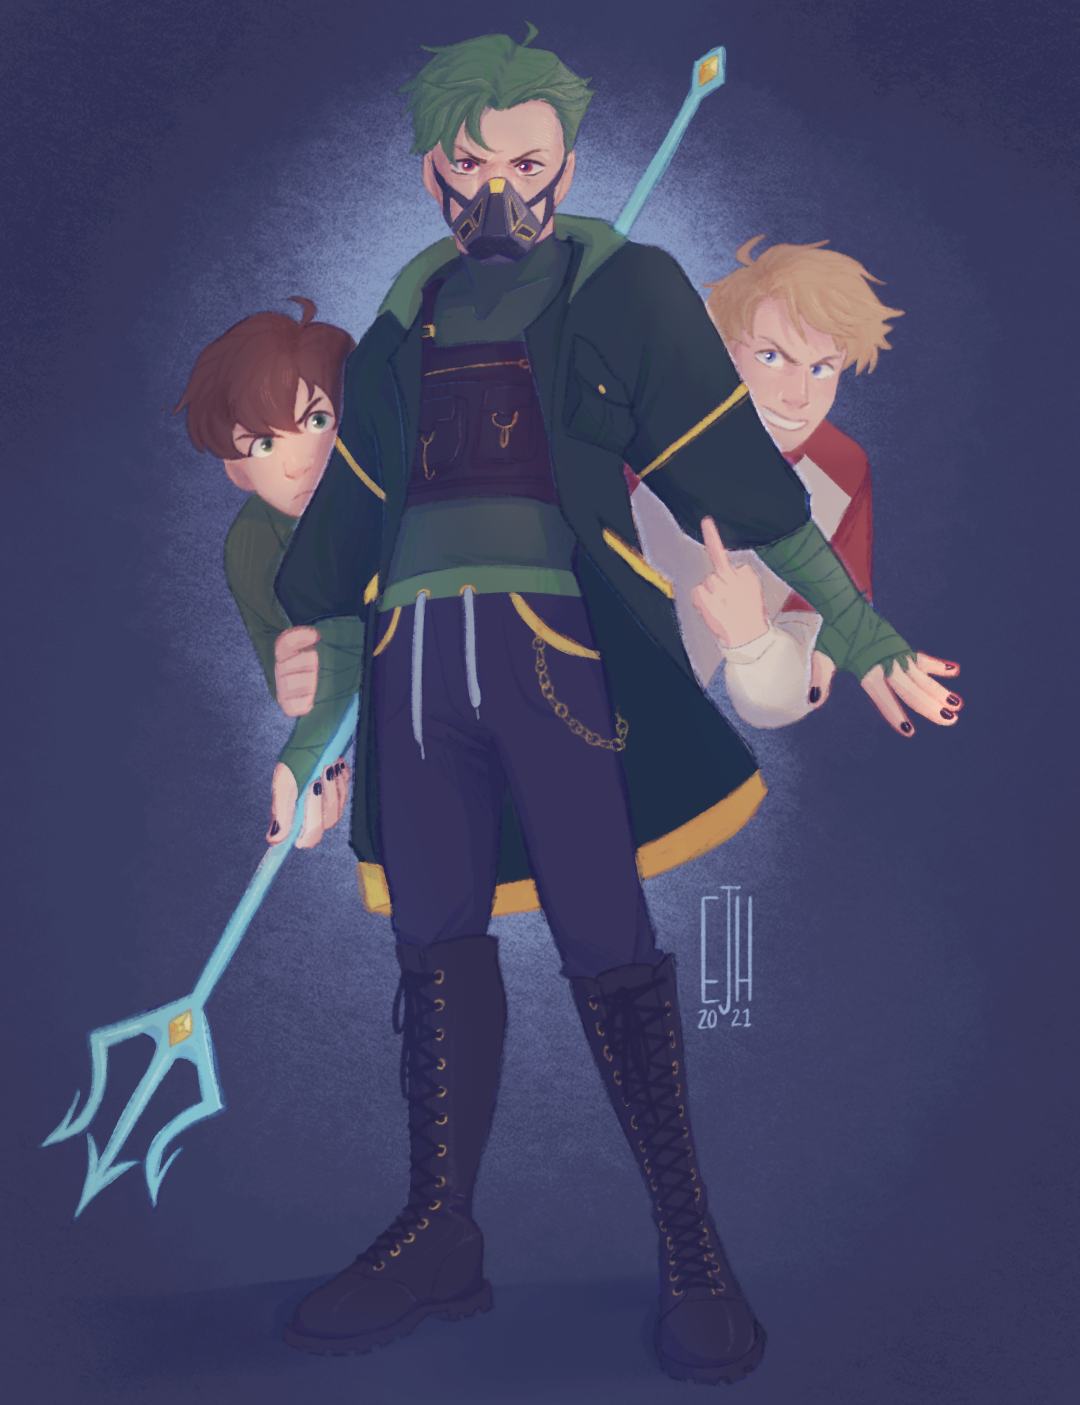 A drawing of Sam with his trident, standing protectively in front of Tommy and Tubbo as they glance around him scared.